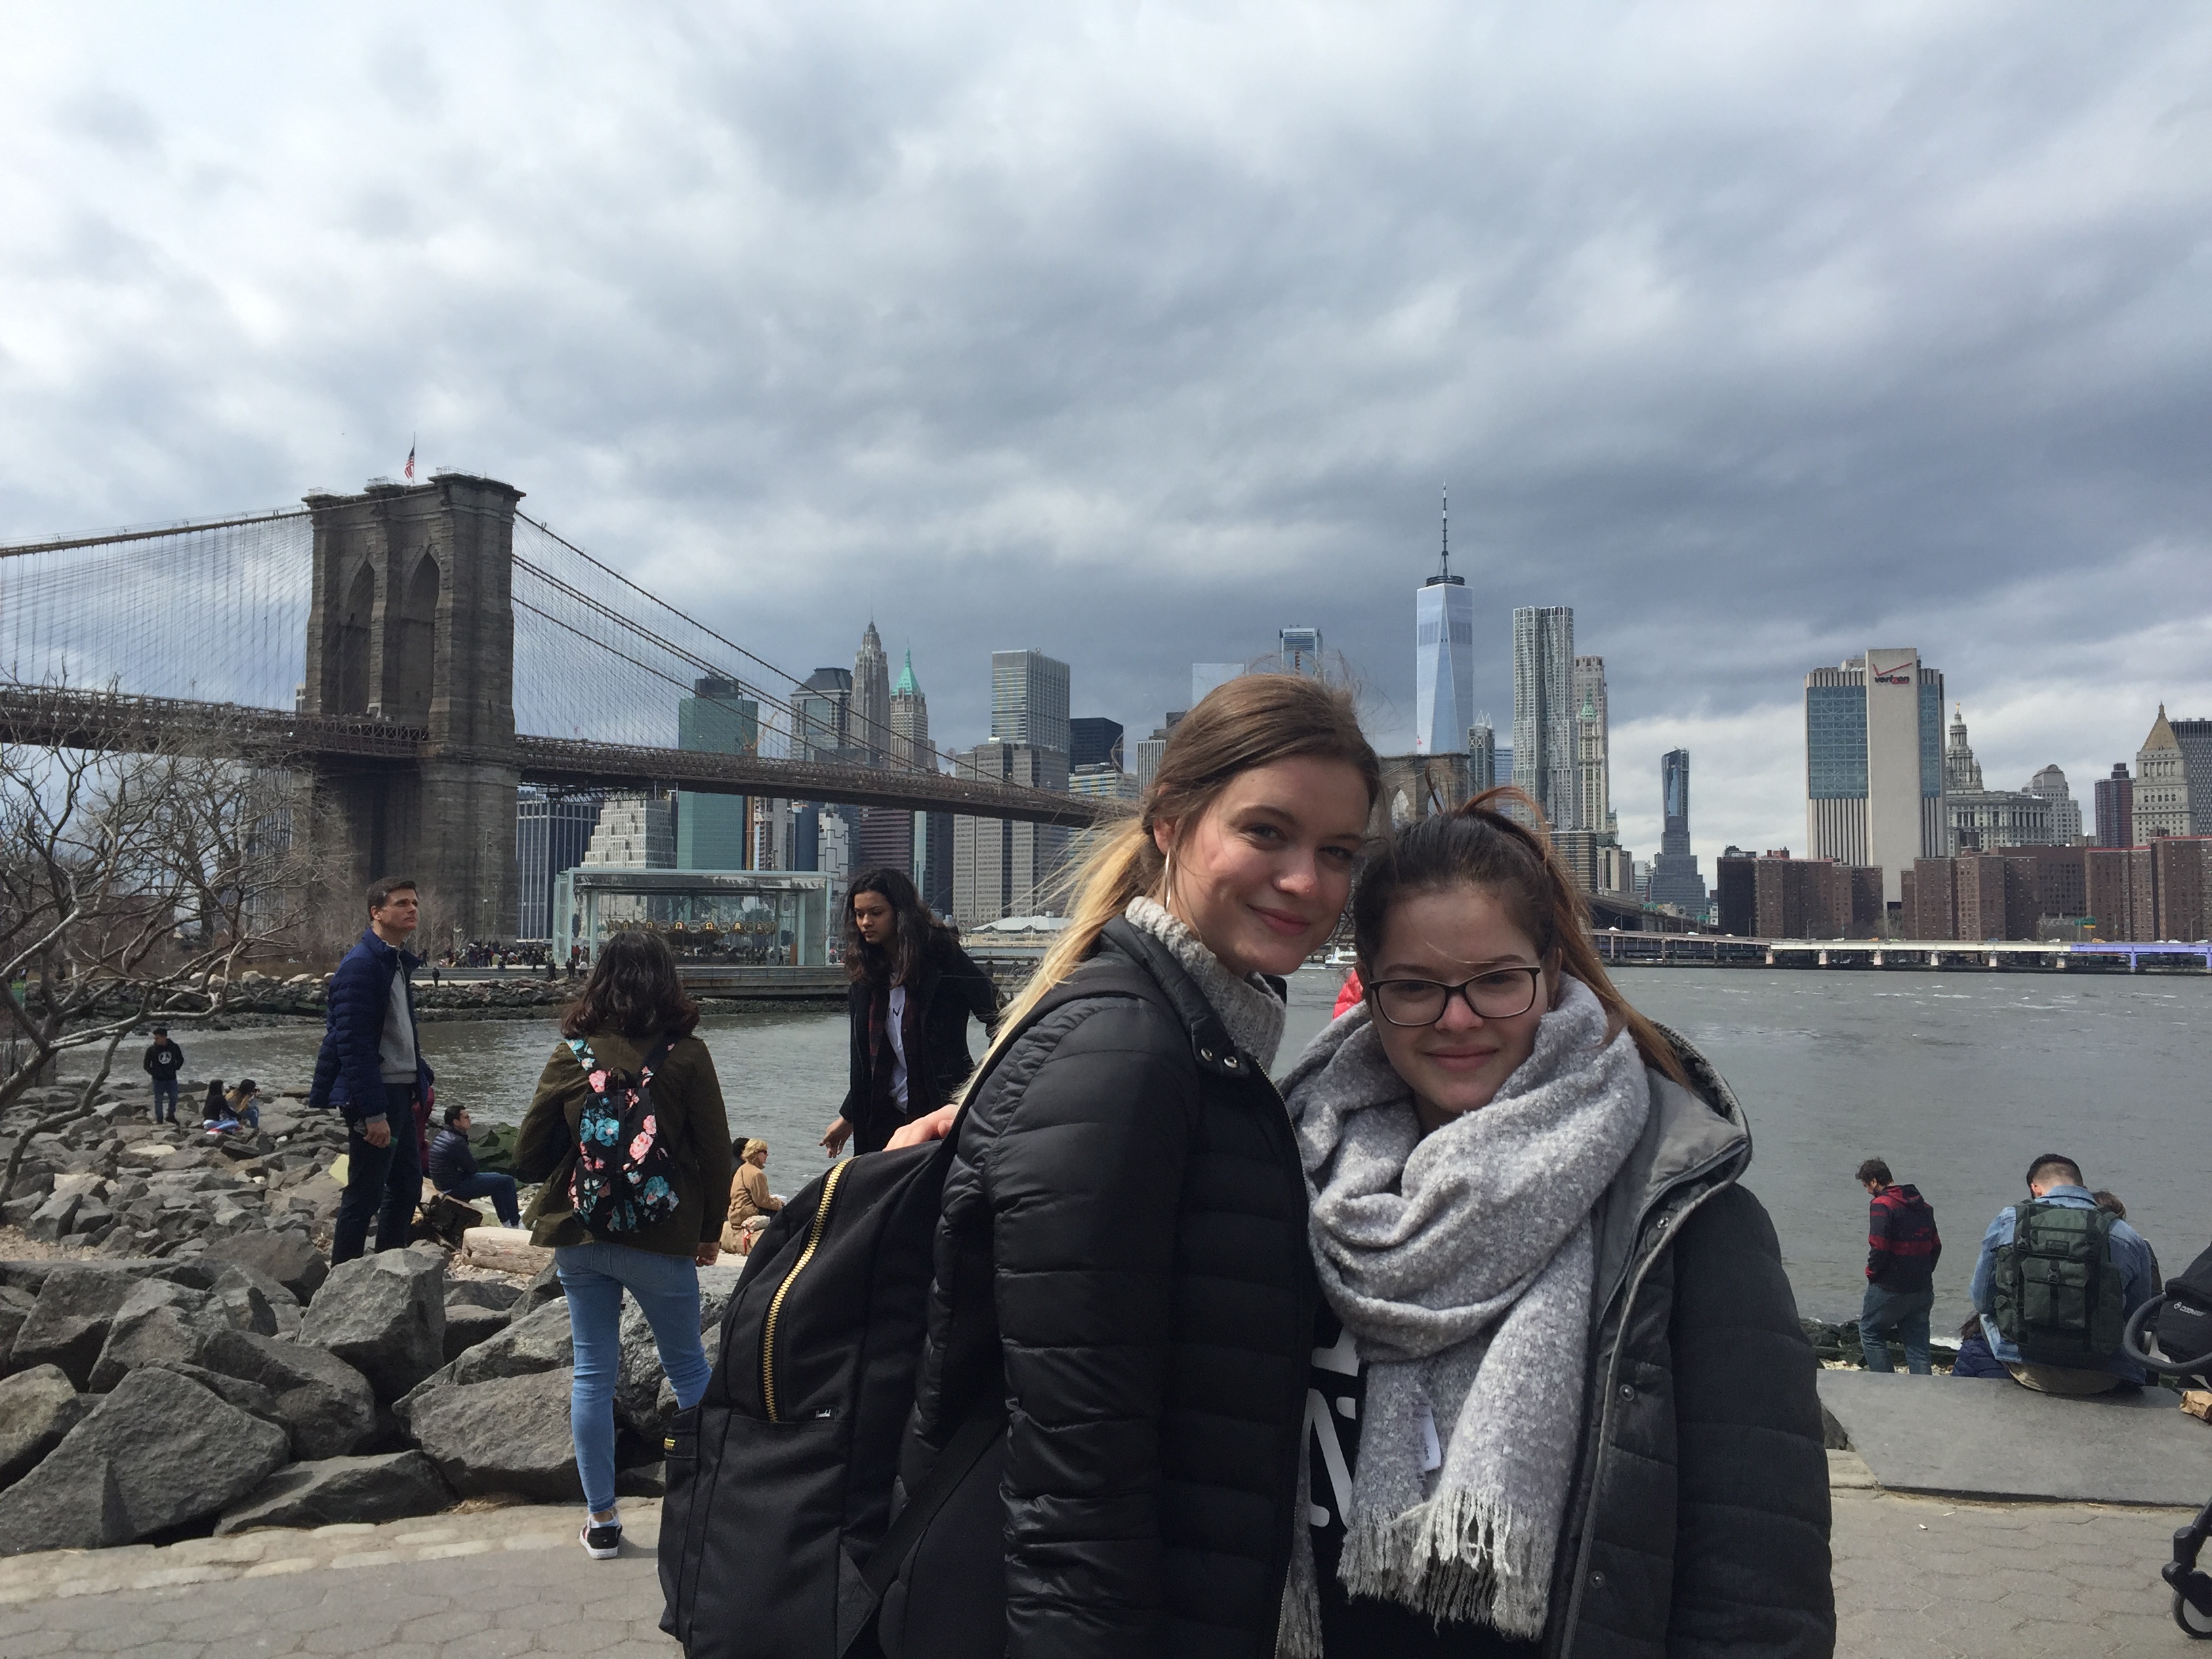 Vanessa and her sister in front of the infamous Brooklyn Bridge (Brooklyn side).